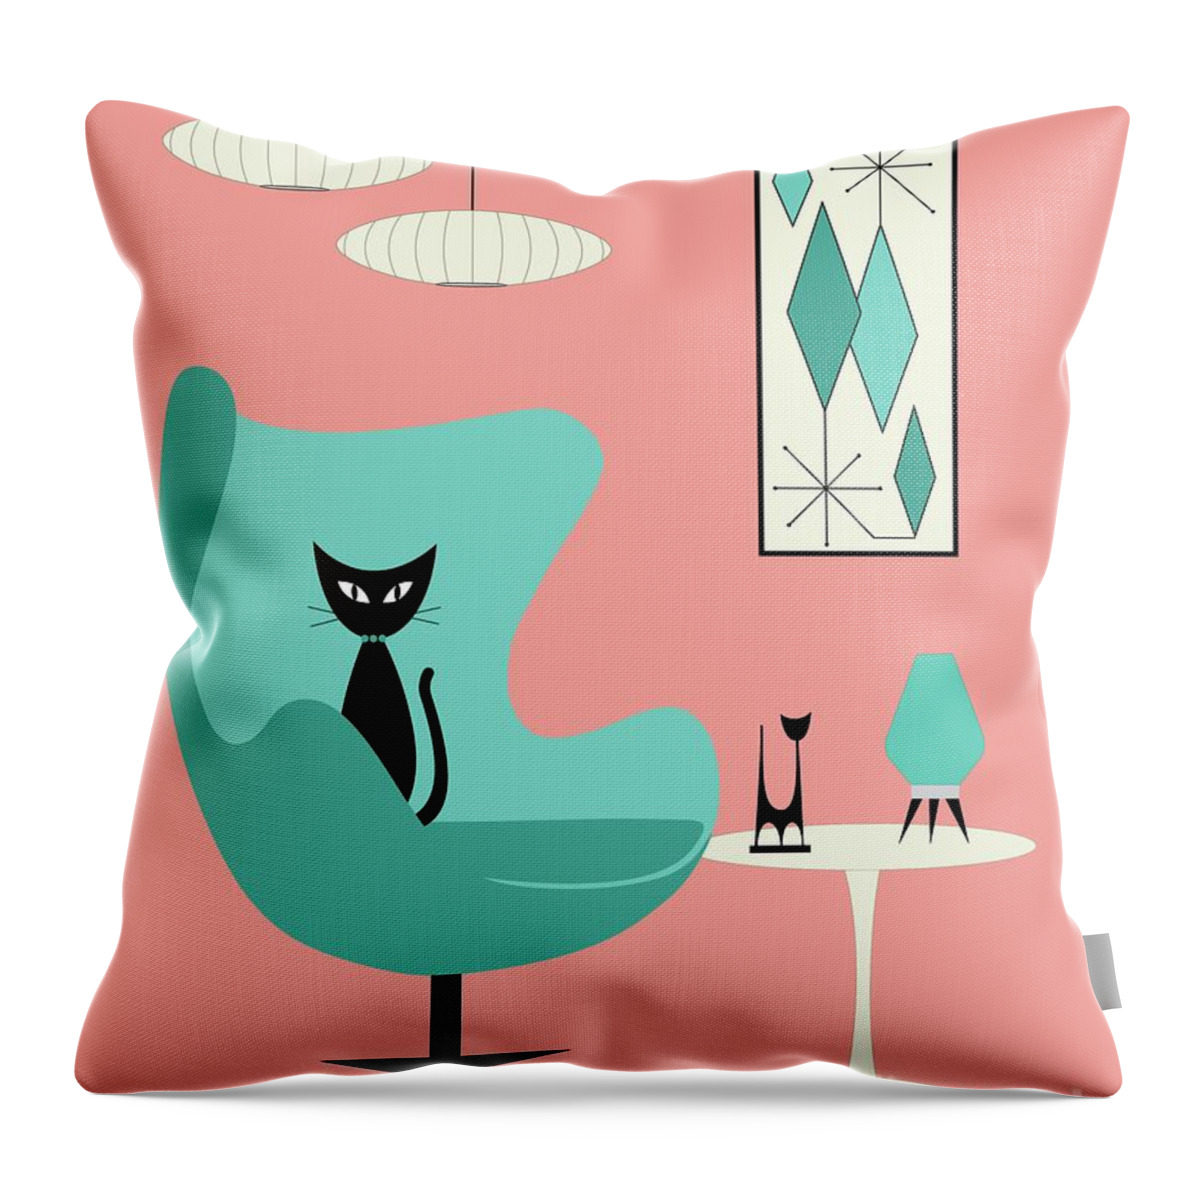 Retro Throw Pillow featuring the digital art Egg Chair in Pink Room by Donna Mibus